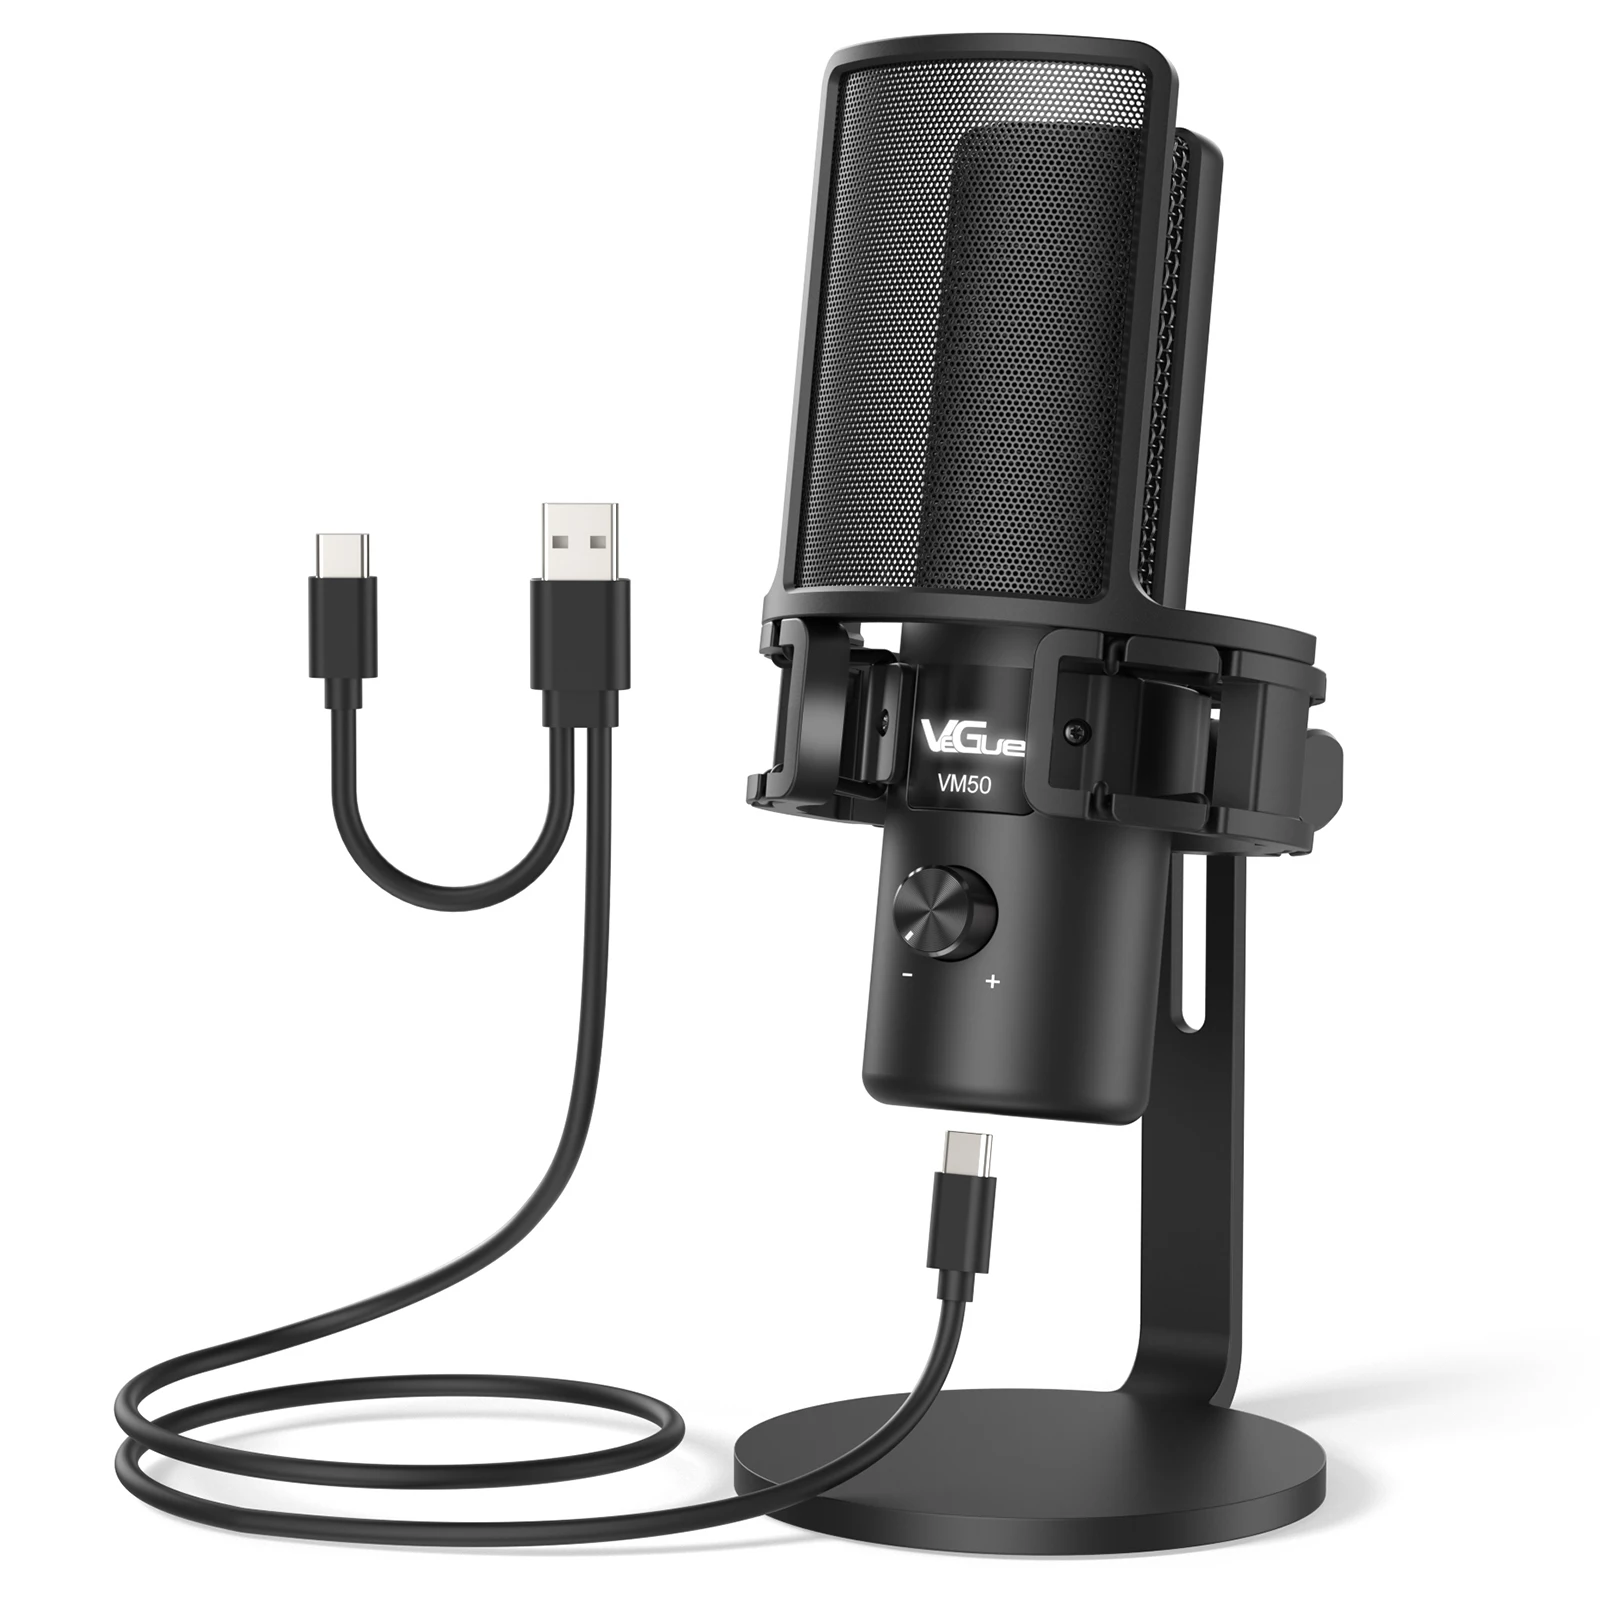 

USB Studio condenser microphone with large diaphragm condenser microphone for broadcasting with tripods